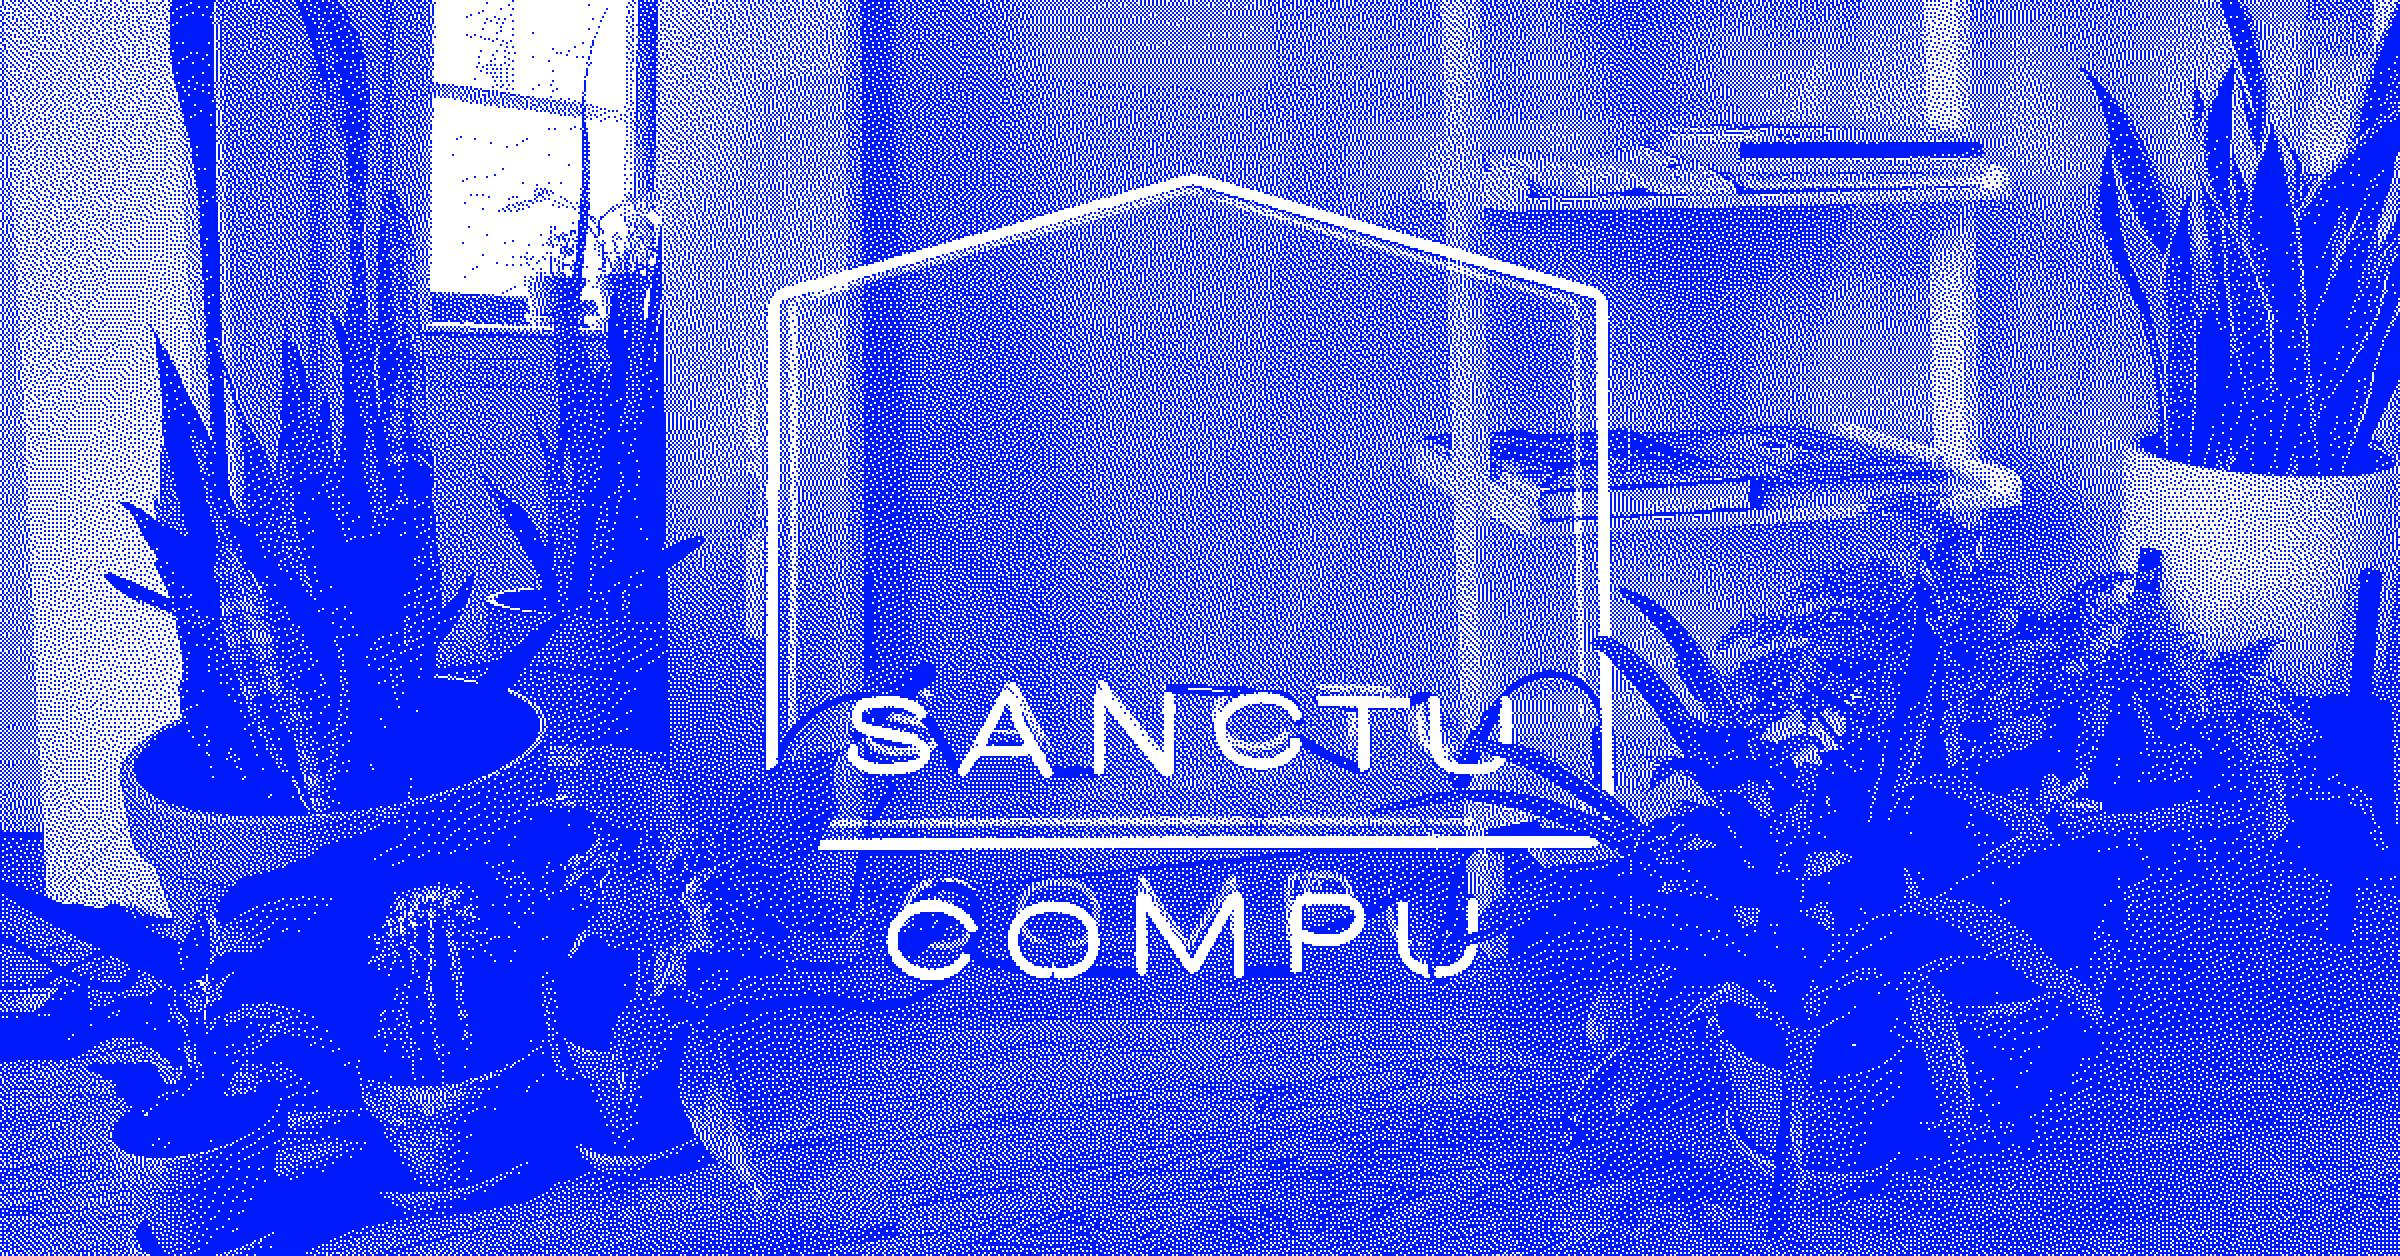 Sanctuary Computer offsets 150% of their emissions